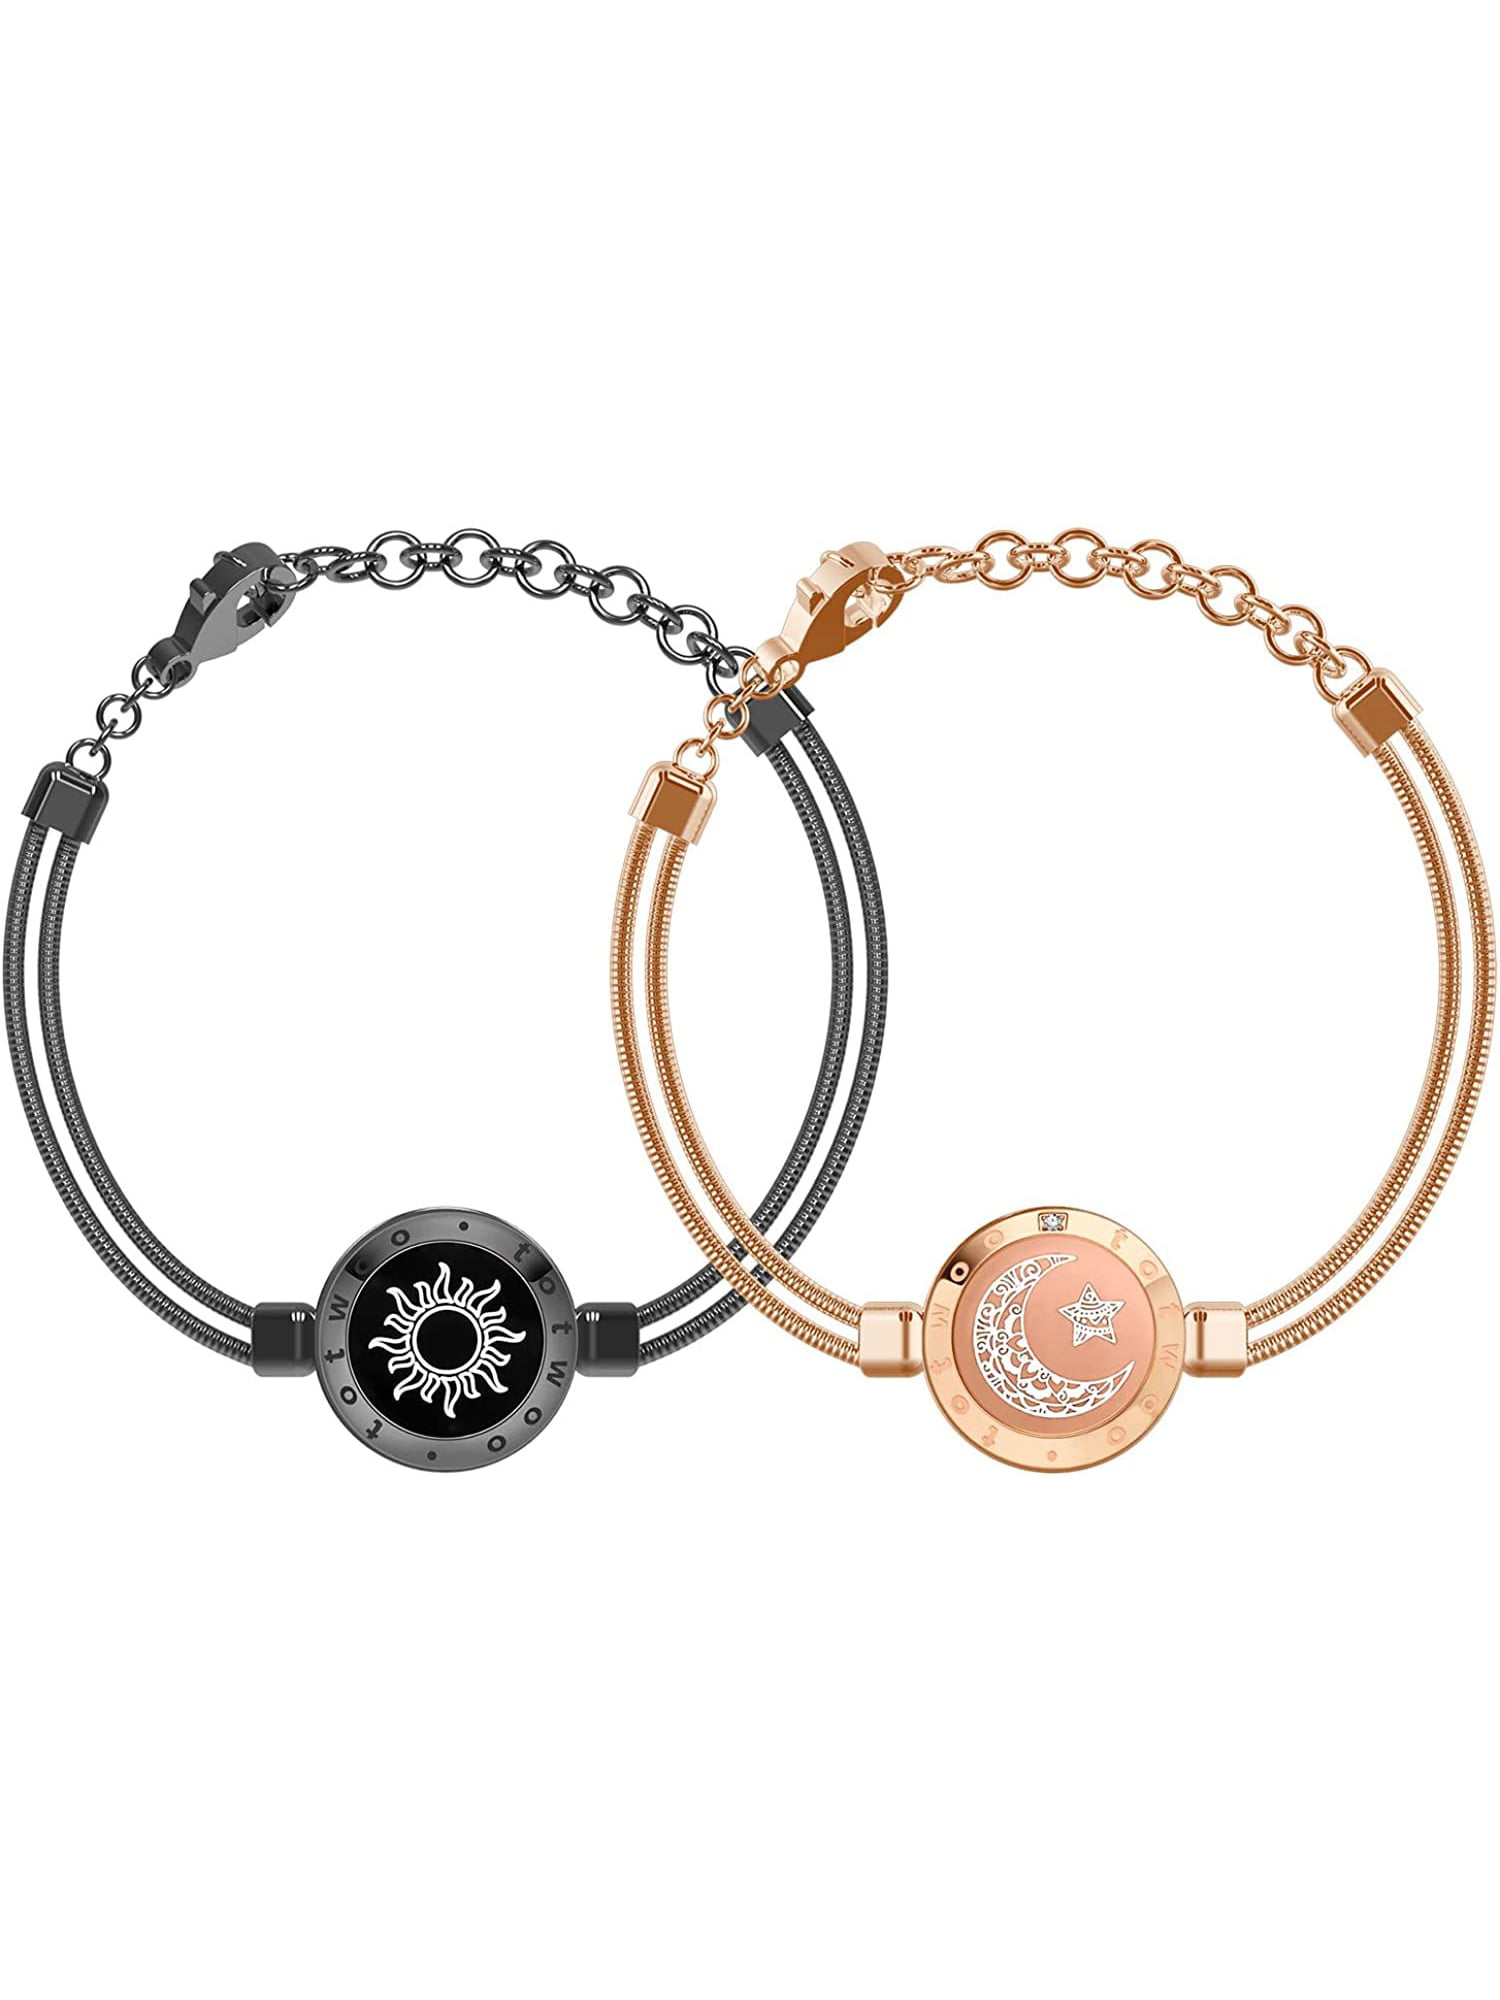 Totwoo Sun and Moon Long Distance Touch Bracelets for Couples - Snake ...